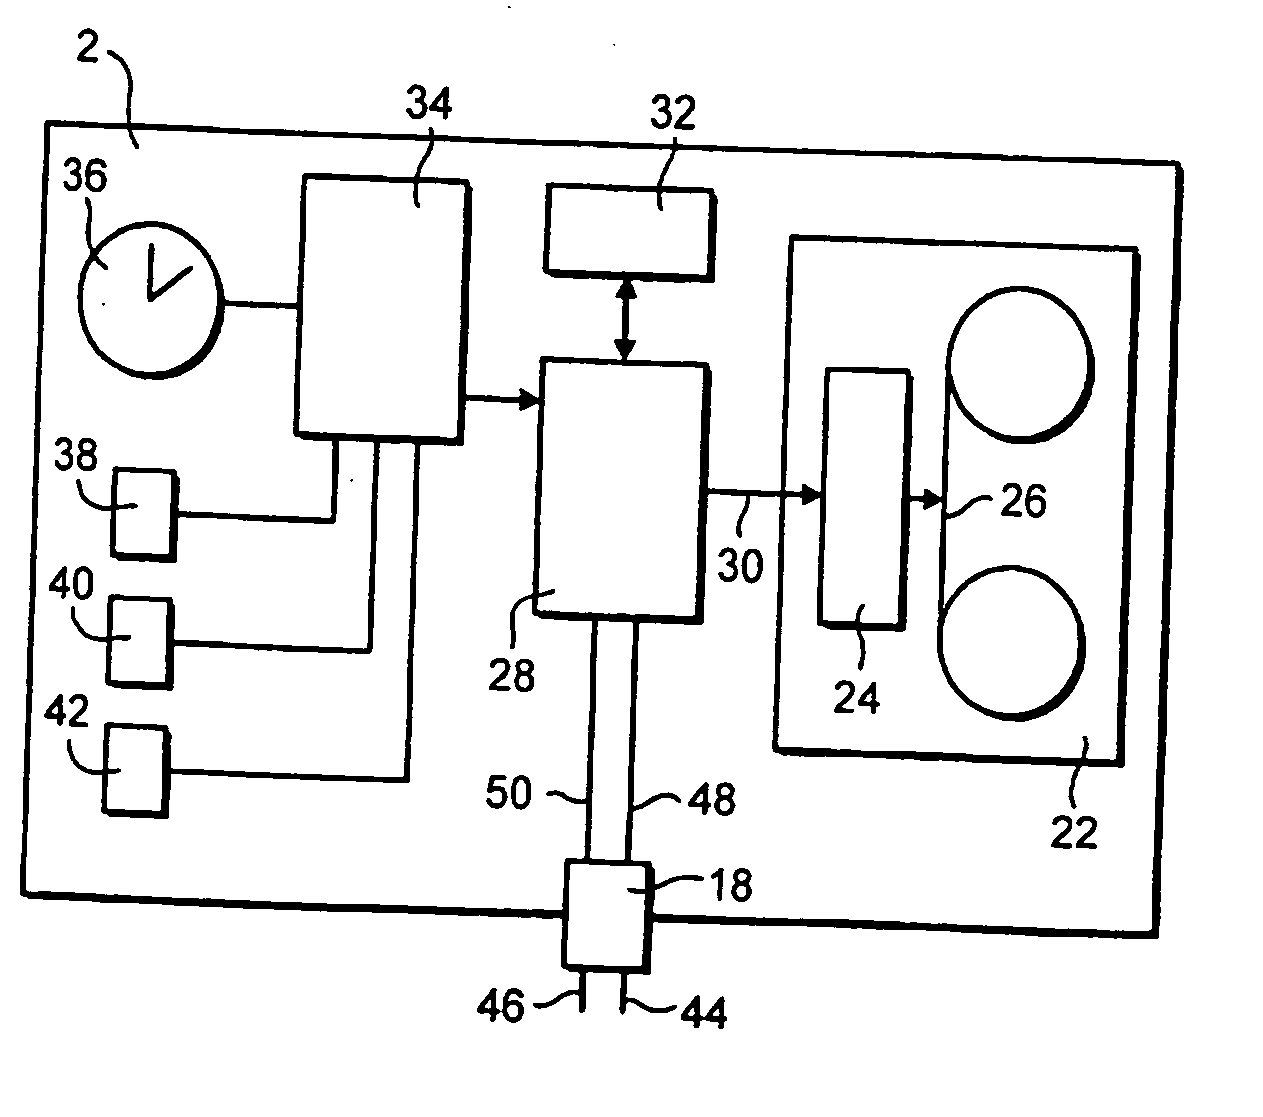 Audio and/or video generation apparatus and method of generating audio and /or video signals